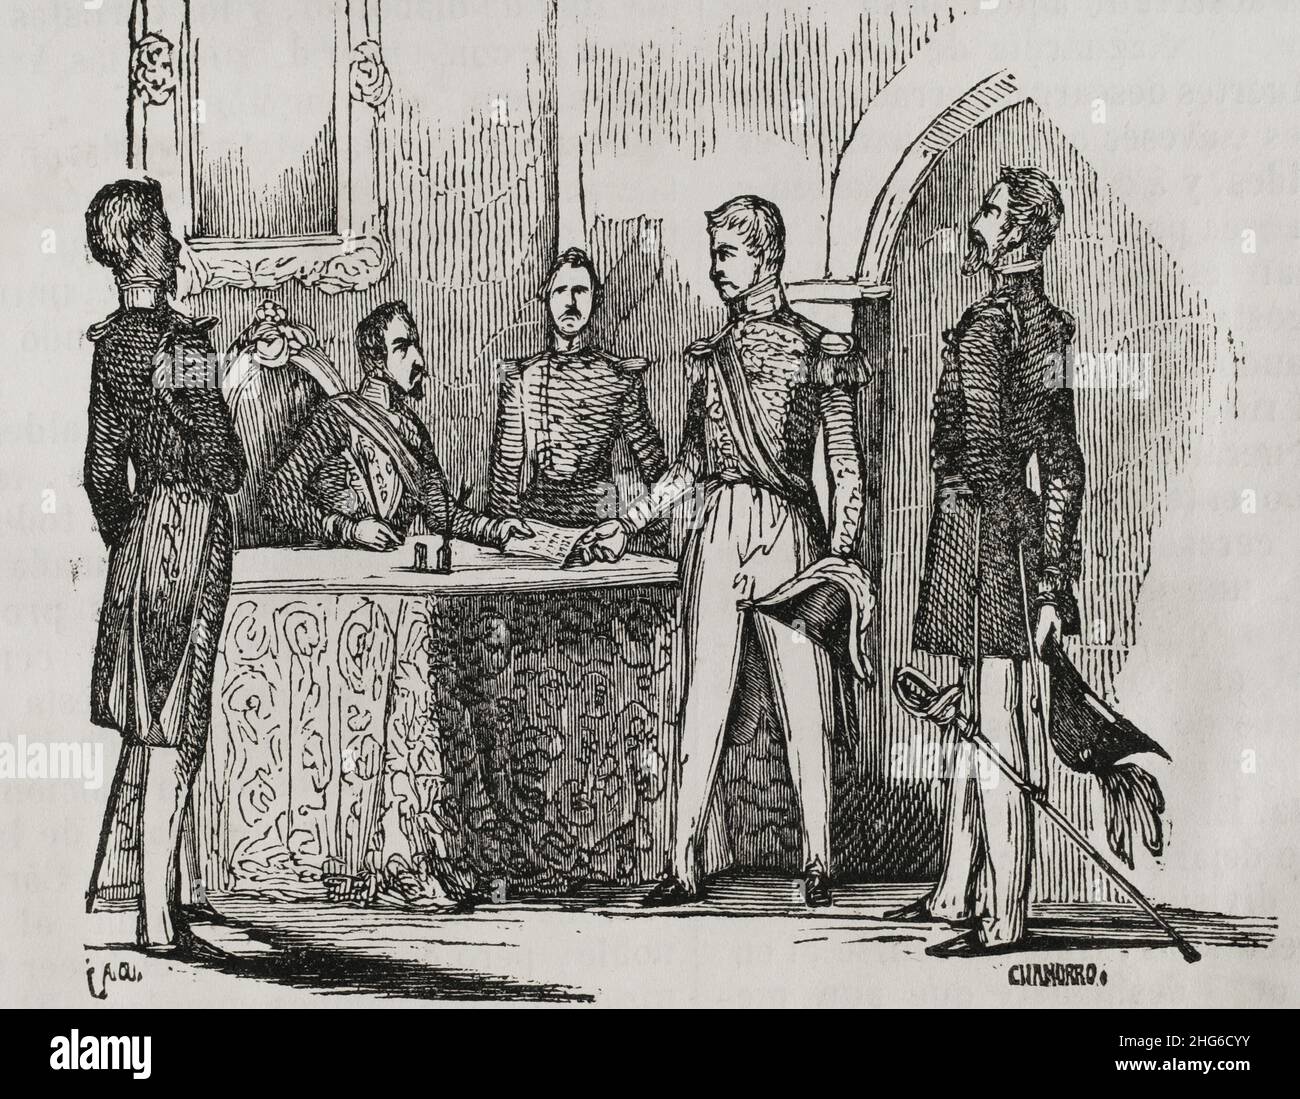 History of Spain. First Carlist War (1833-1840). The Eliot Treaty. The British diplomat Edward Granville Eliot travelled to the Basque provinces as a representative of the British government to reach an agreement between Carlists and Liberals that would allow the lives of prisoners of war to be respected. On 27th and 28th April 1835, the treaty was signed in Asarta and Logroño between Tomás Zamalacárregui (Carlist side), Gerónimo Valdés (Liberal side), Eliot and Lieutenant-Colonel Gurwood. Engraving by Chamorro. Panorama Español, Crónica Contemporánea. Volume III Madrid, 1845. Author: Chamorro Stock Photo